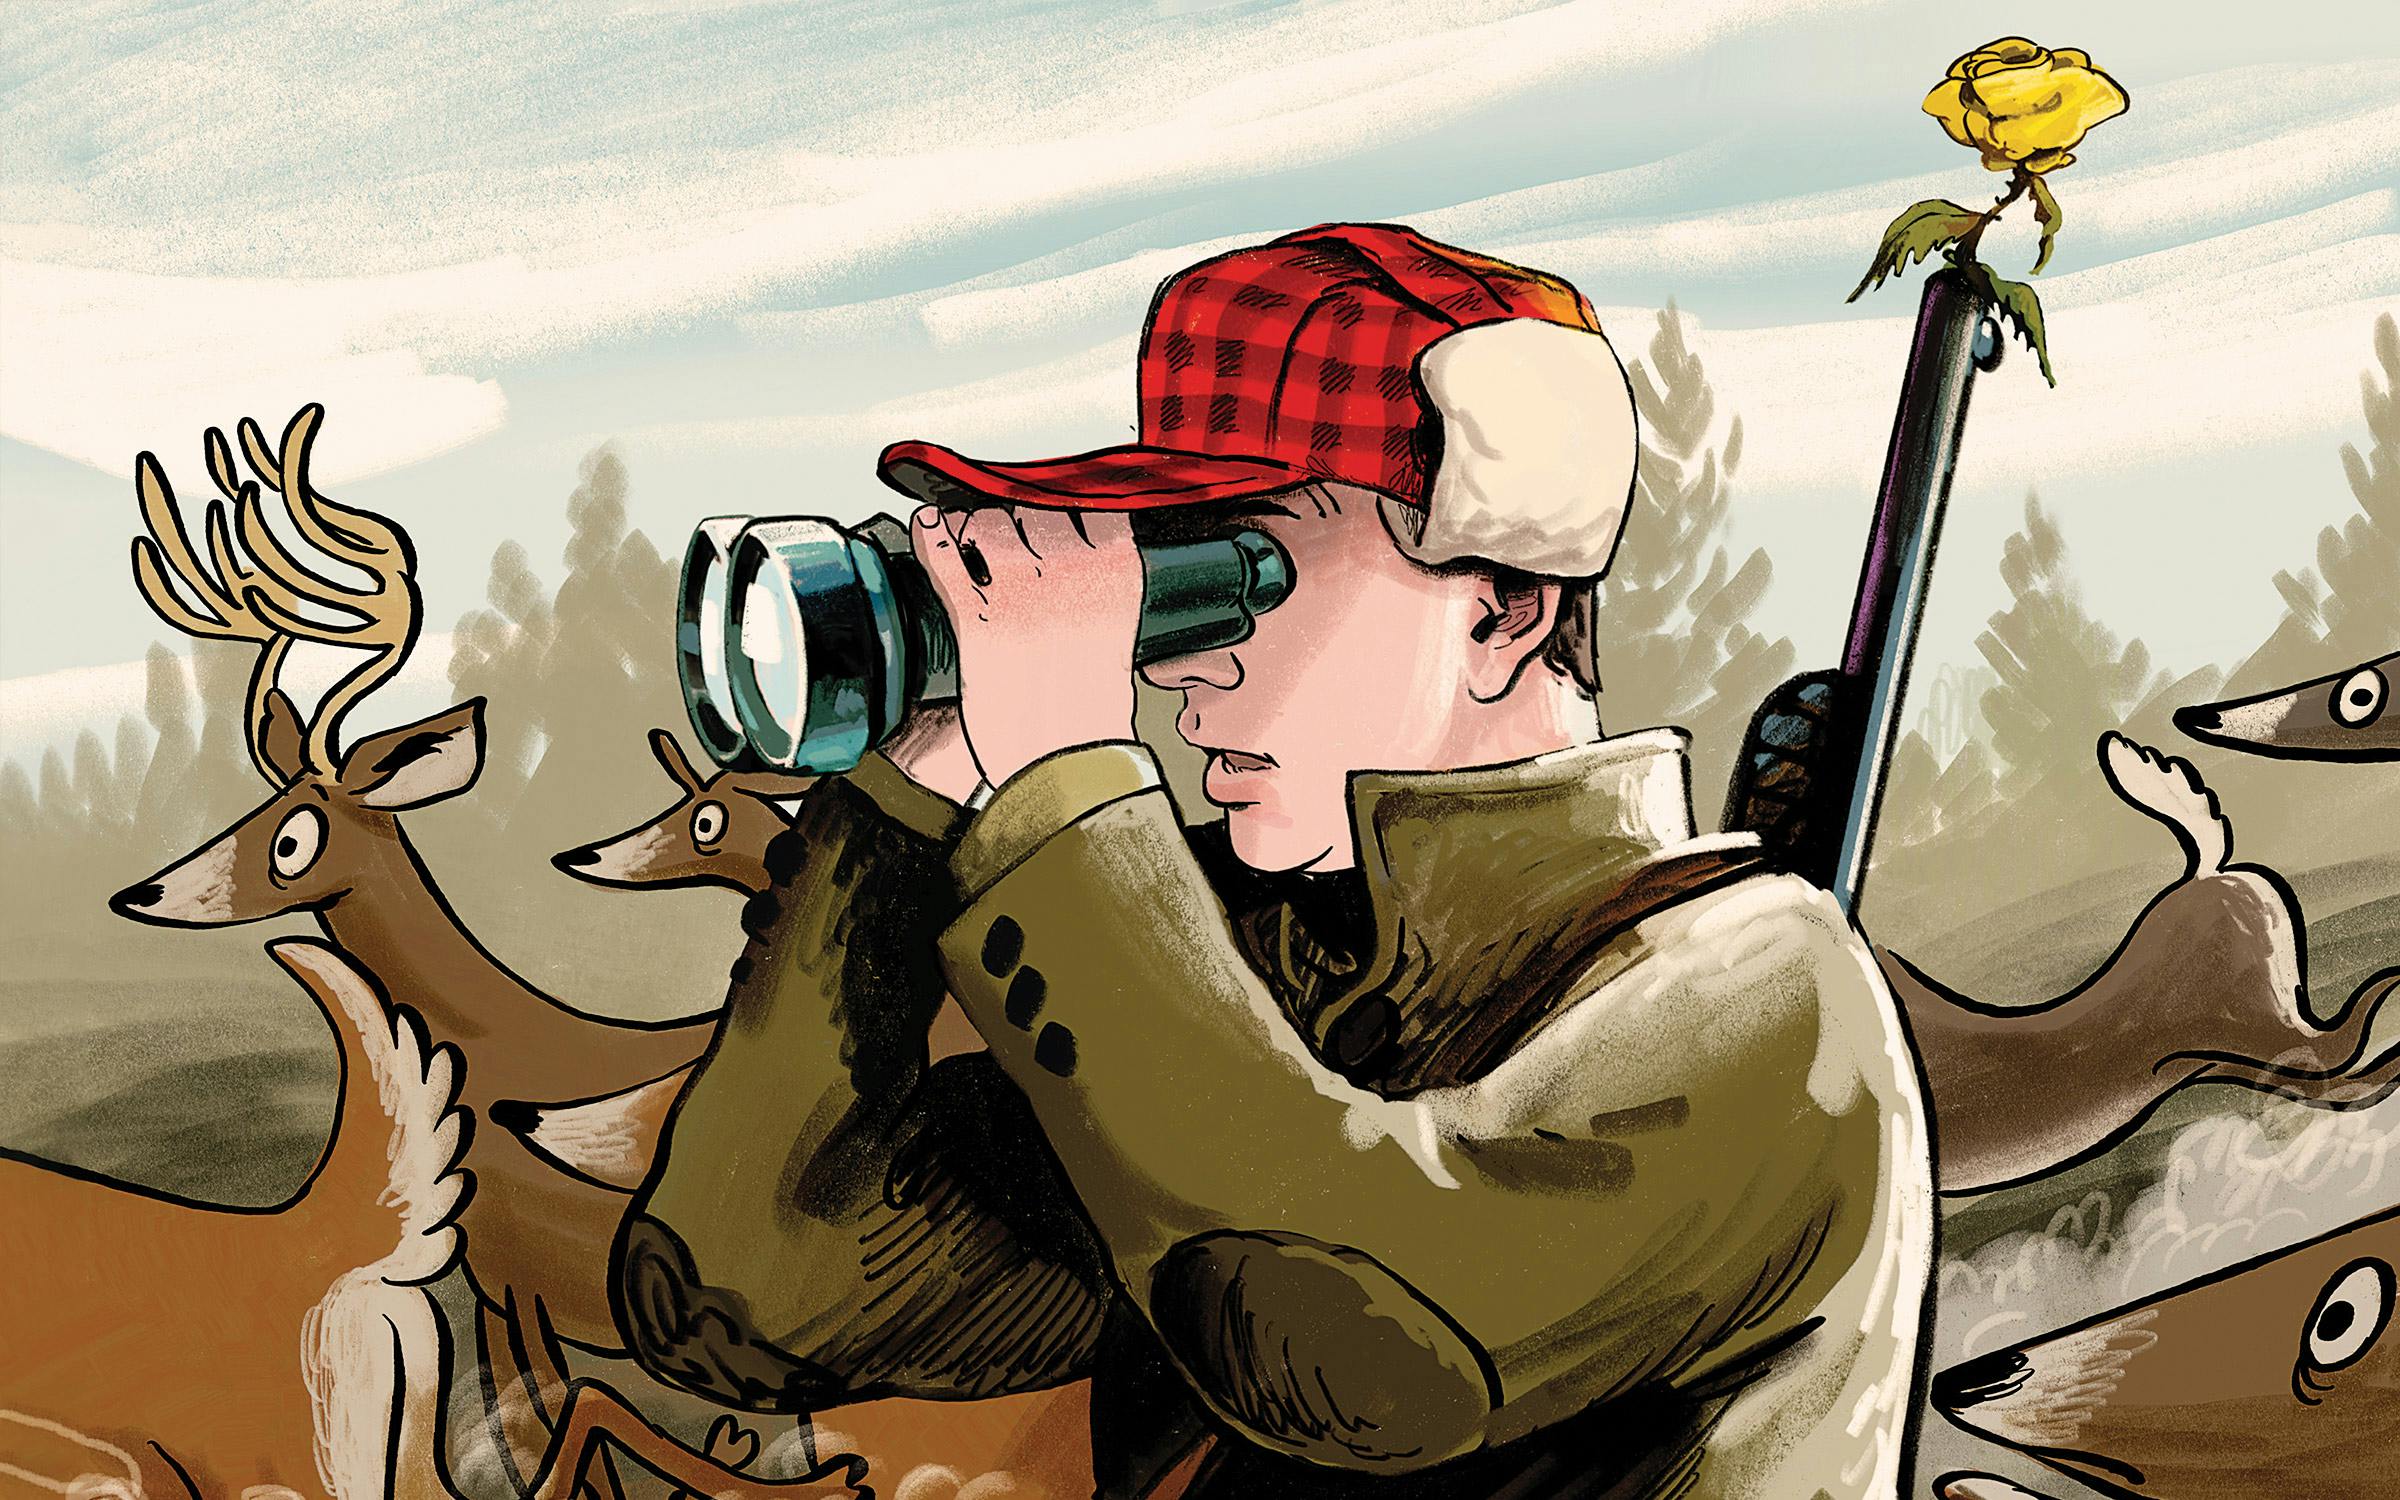 The Texanist: What Would Happen if We Stopped Hunting Deer?